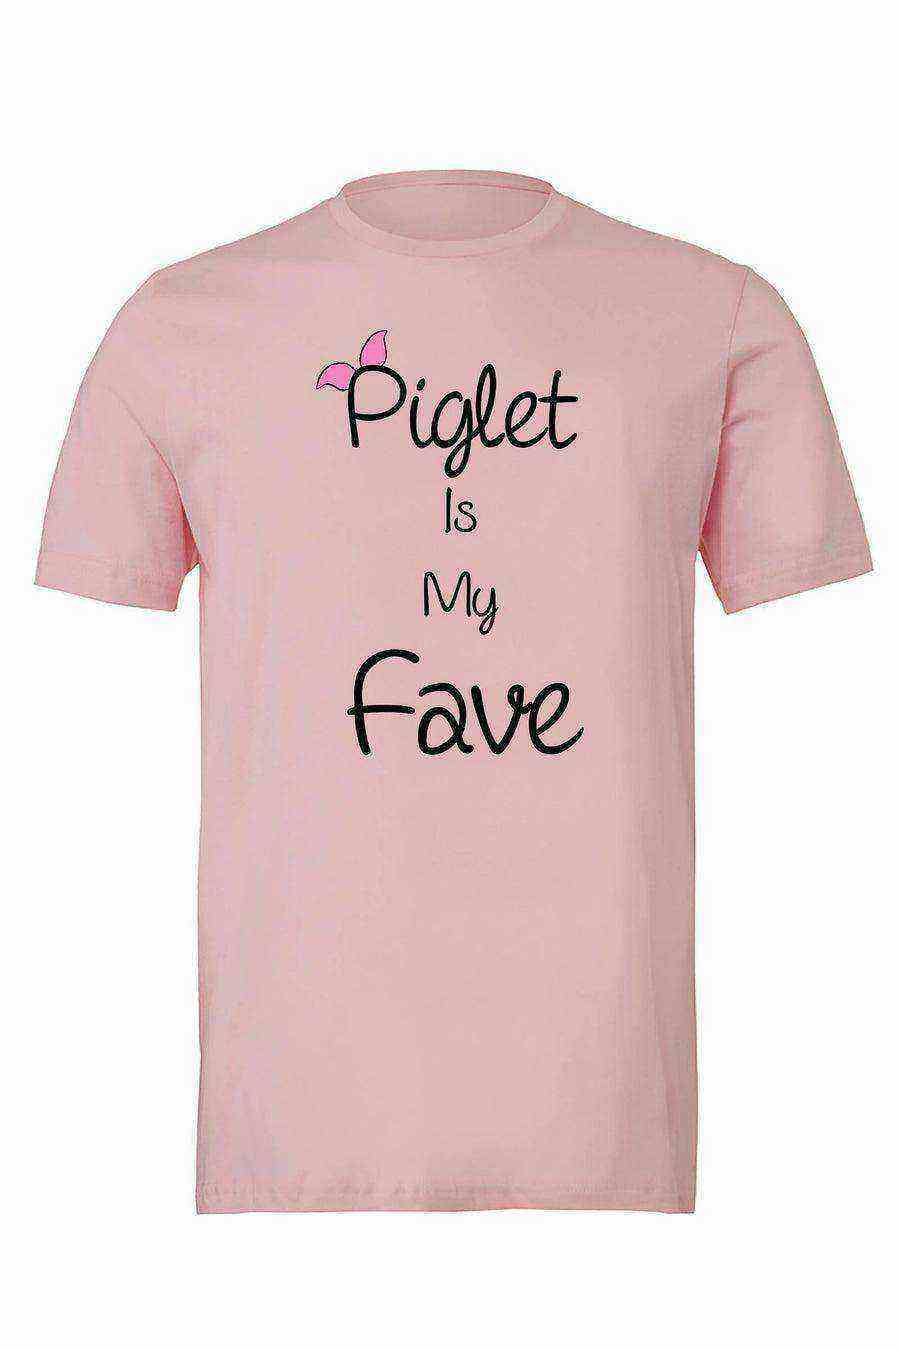 Piglet Is My Fave Shirt - Dylan's Tees